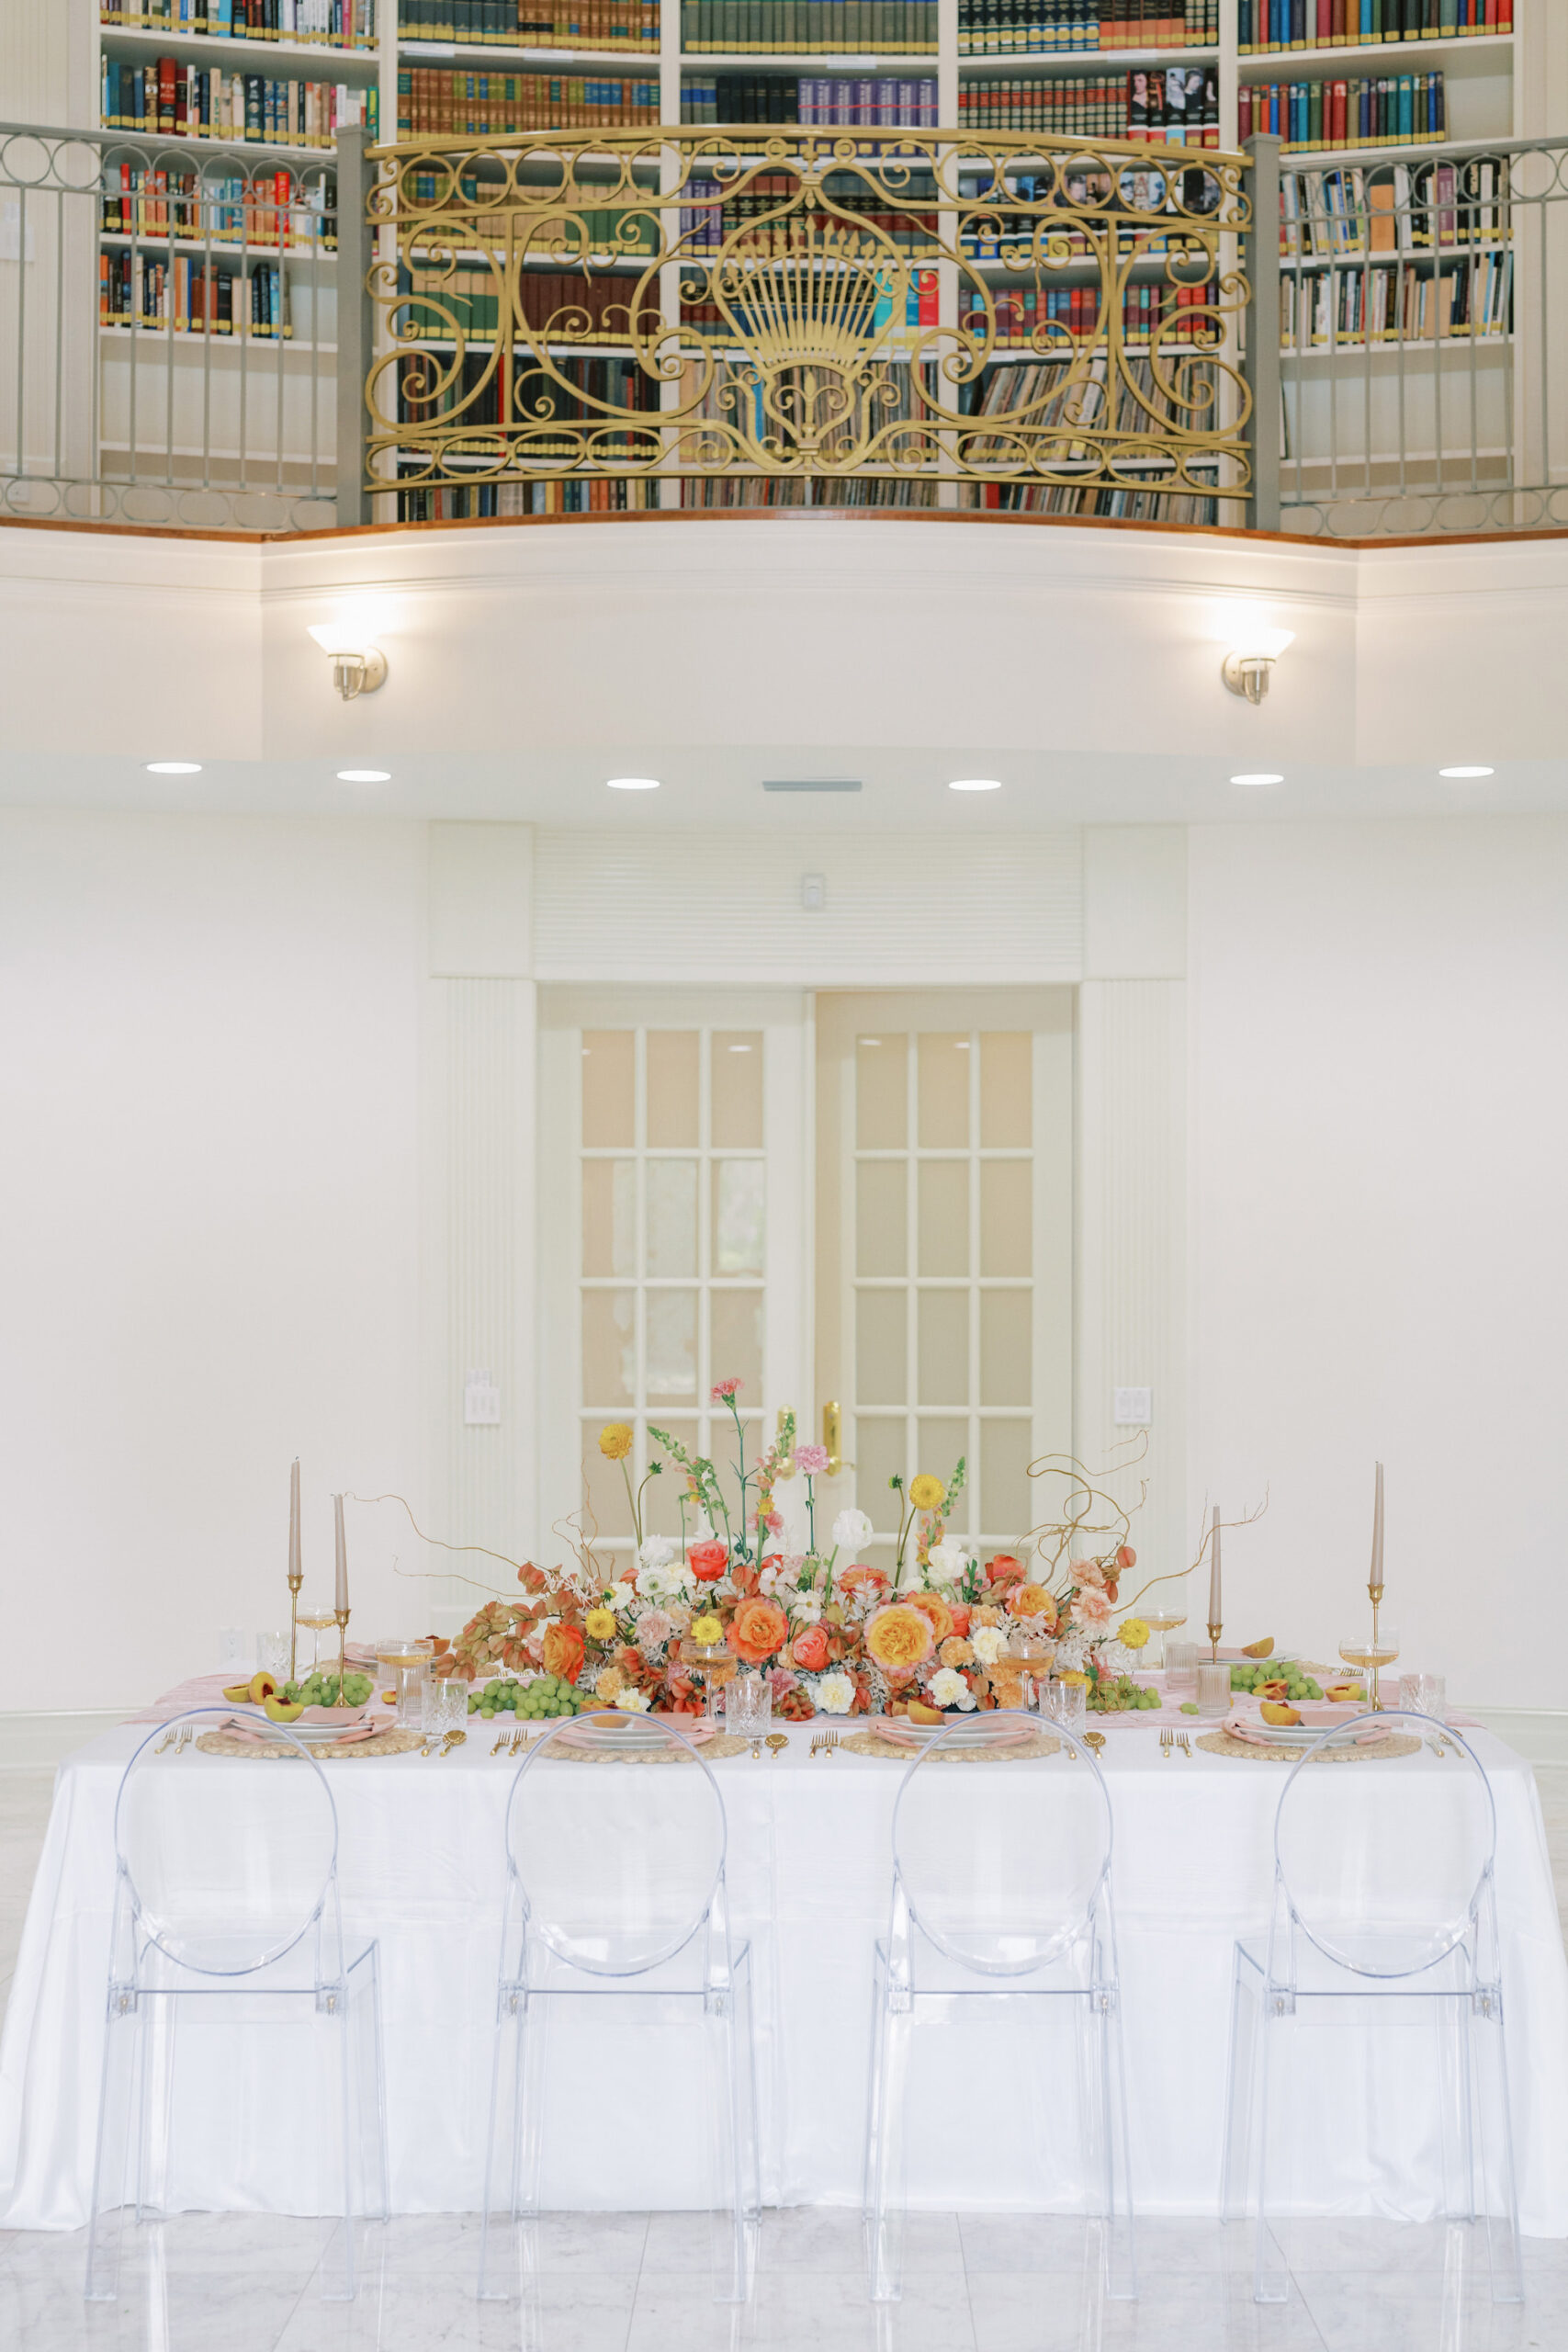 Romantic Modern Wedding Reception Ideas with Ghost Chairs and Peach Spring Floral Centerpieces | Neoclassical Architectural Tarpon Springs Wedding Venue Whitehurst Gallery